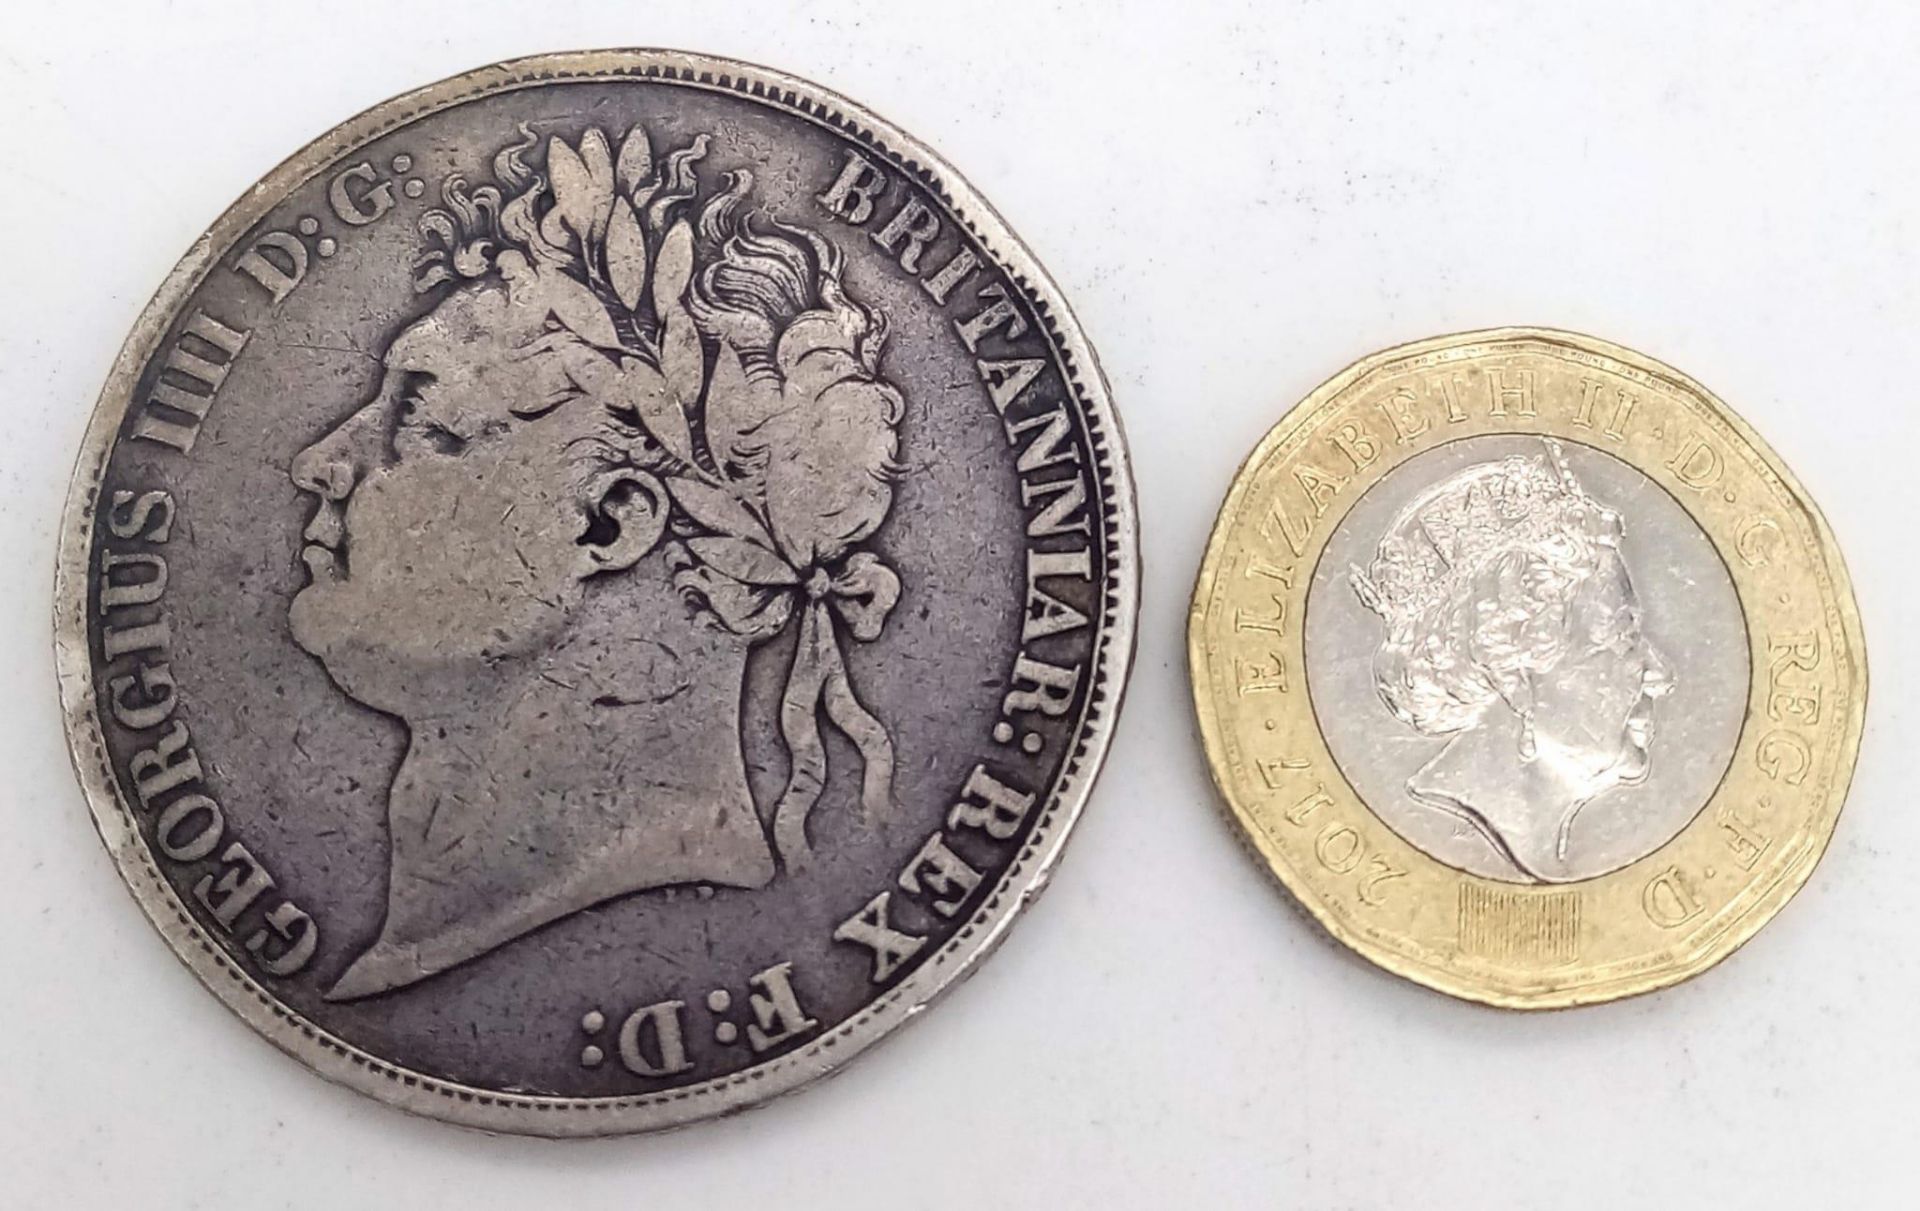 A GEORGE III SILVER CROWN 1820 WITH GEORGE SLAYING THE DRAGON ON THE REVERSE SIDE . - Image 3 of 3